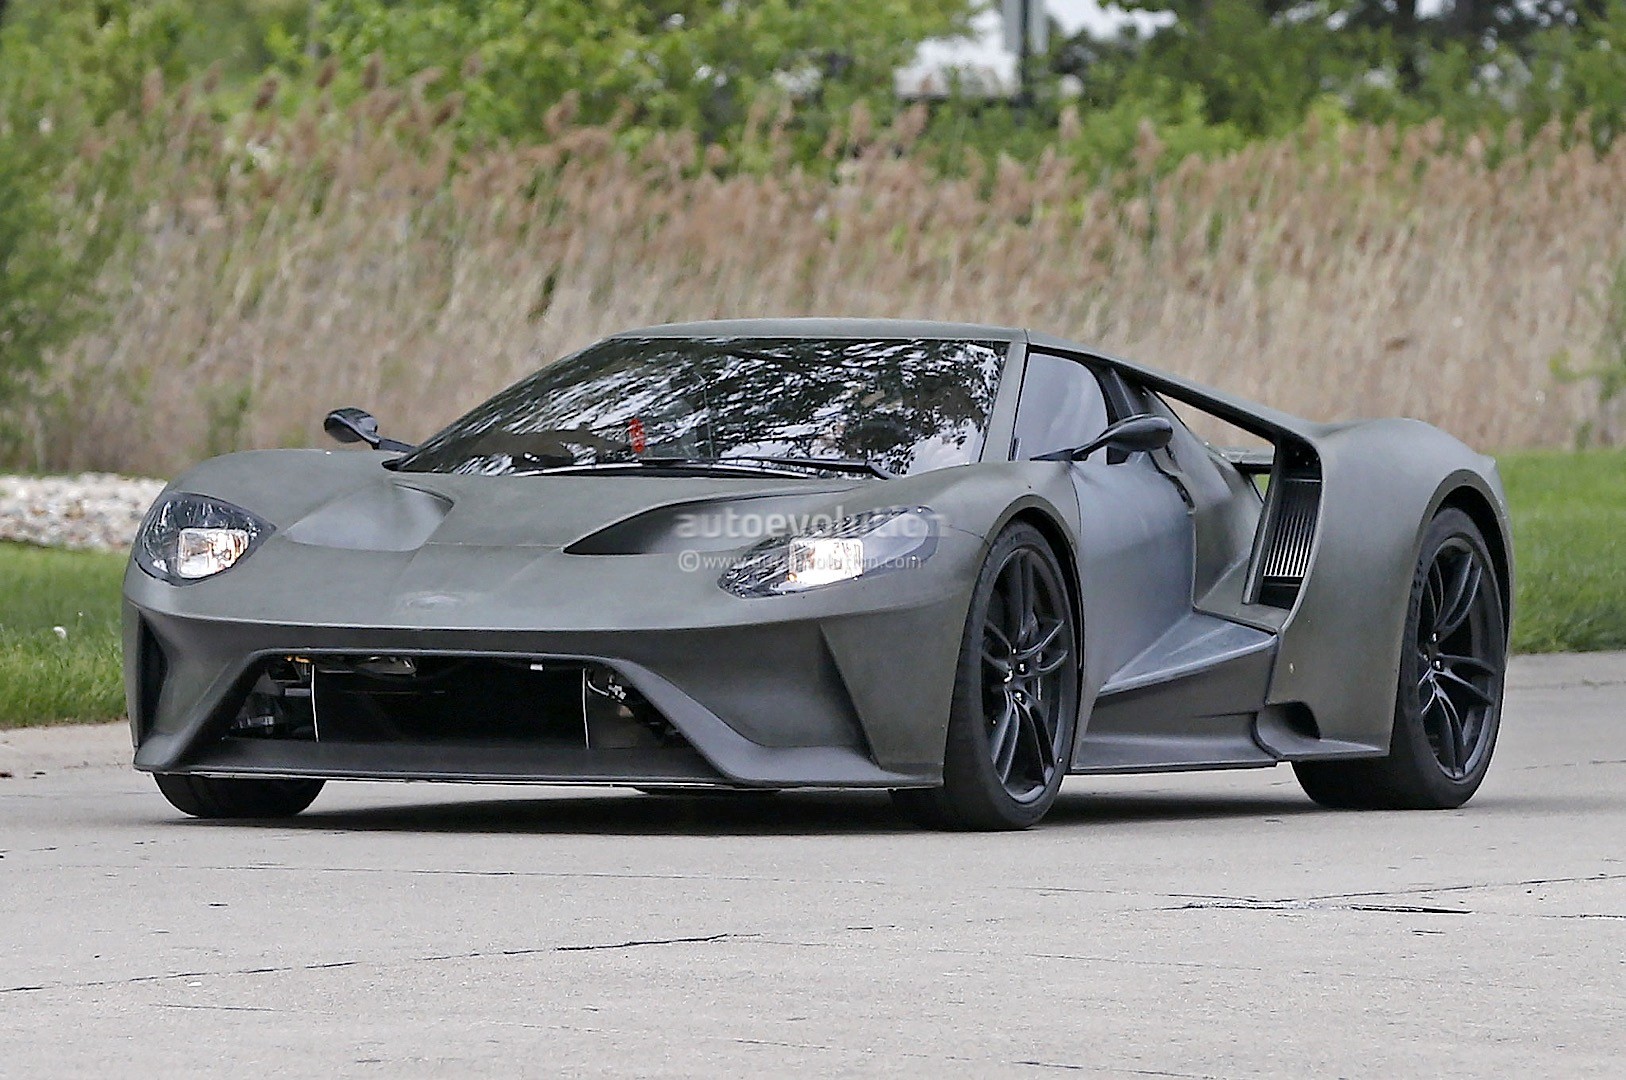 2017-ford-gt-test-mule-spied-looks-apocalyptic-sans-paint-photo-gallery_2.jpg